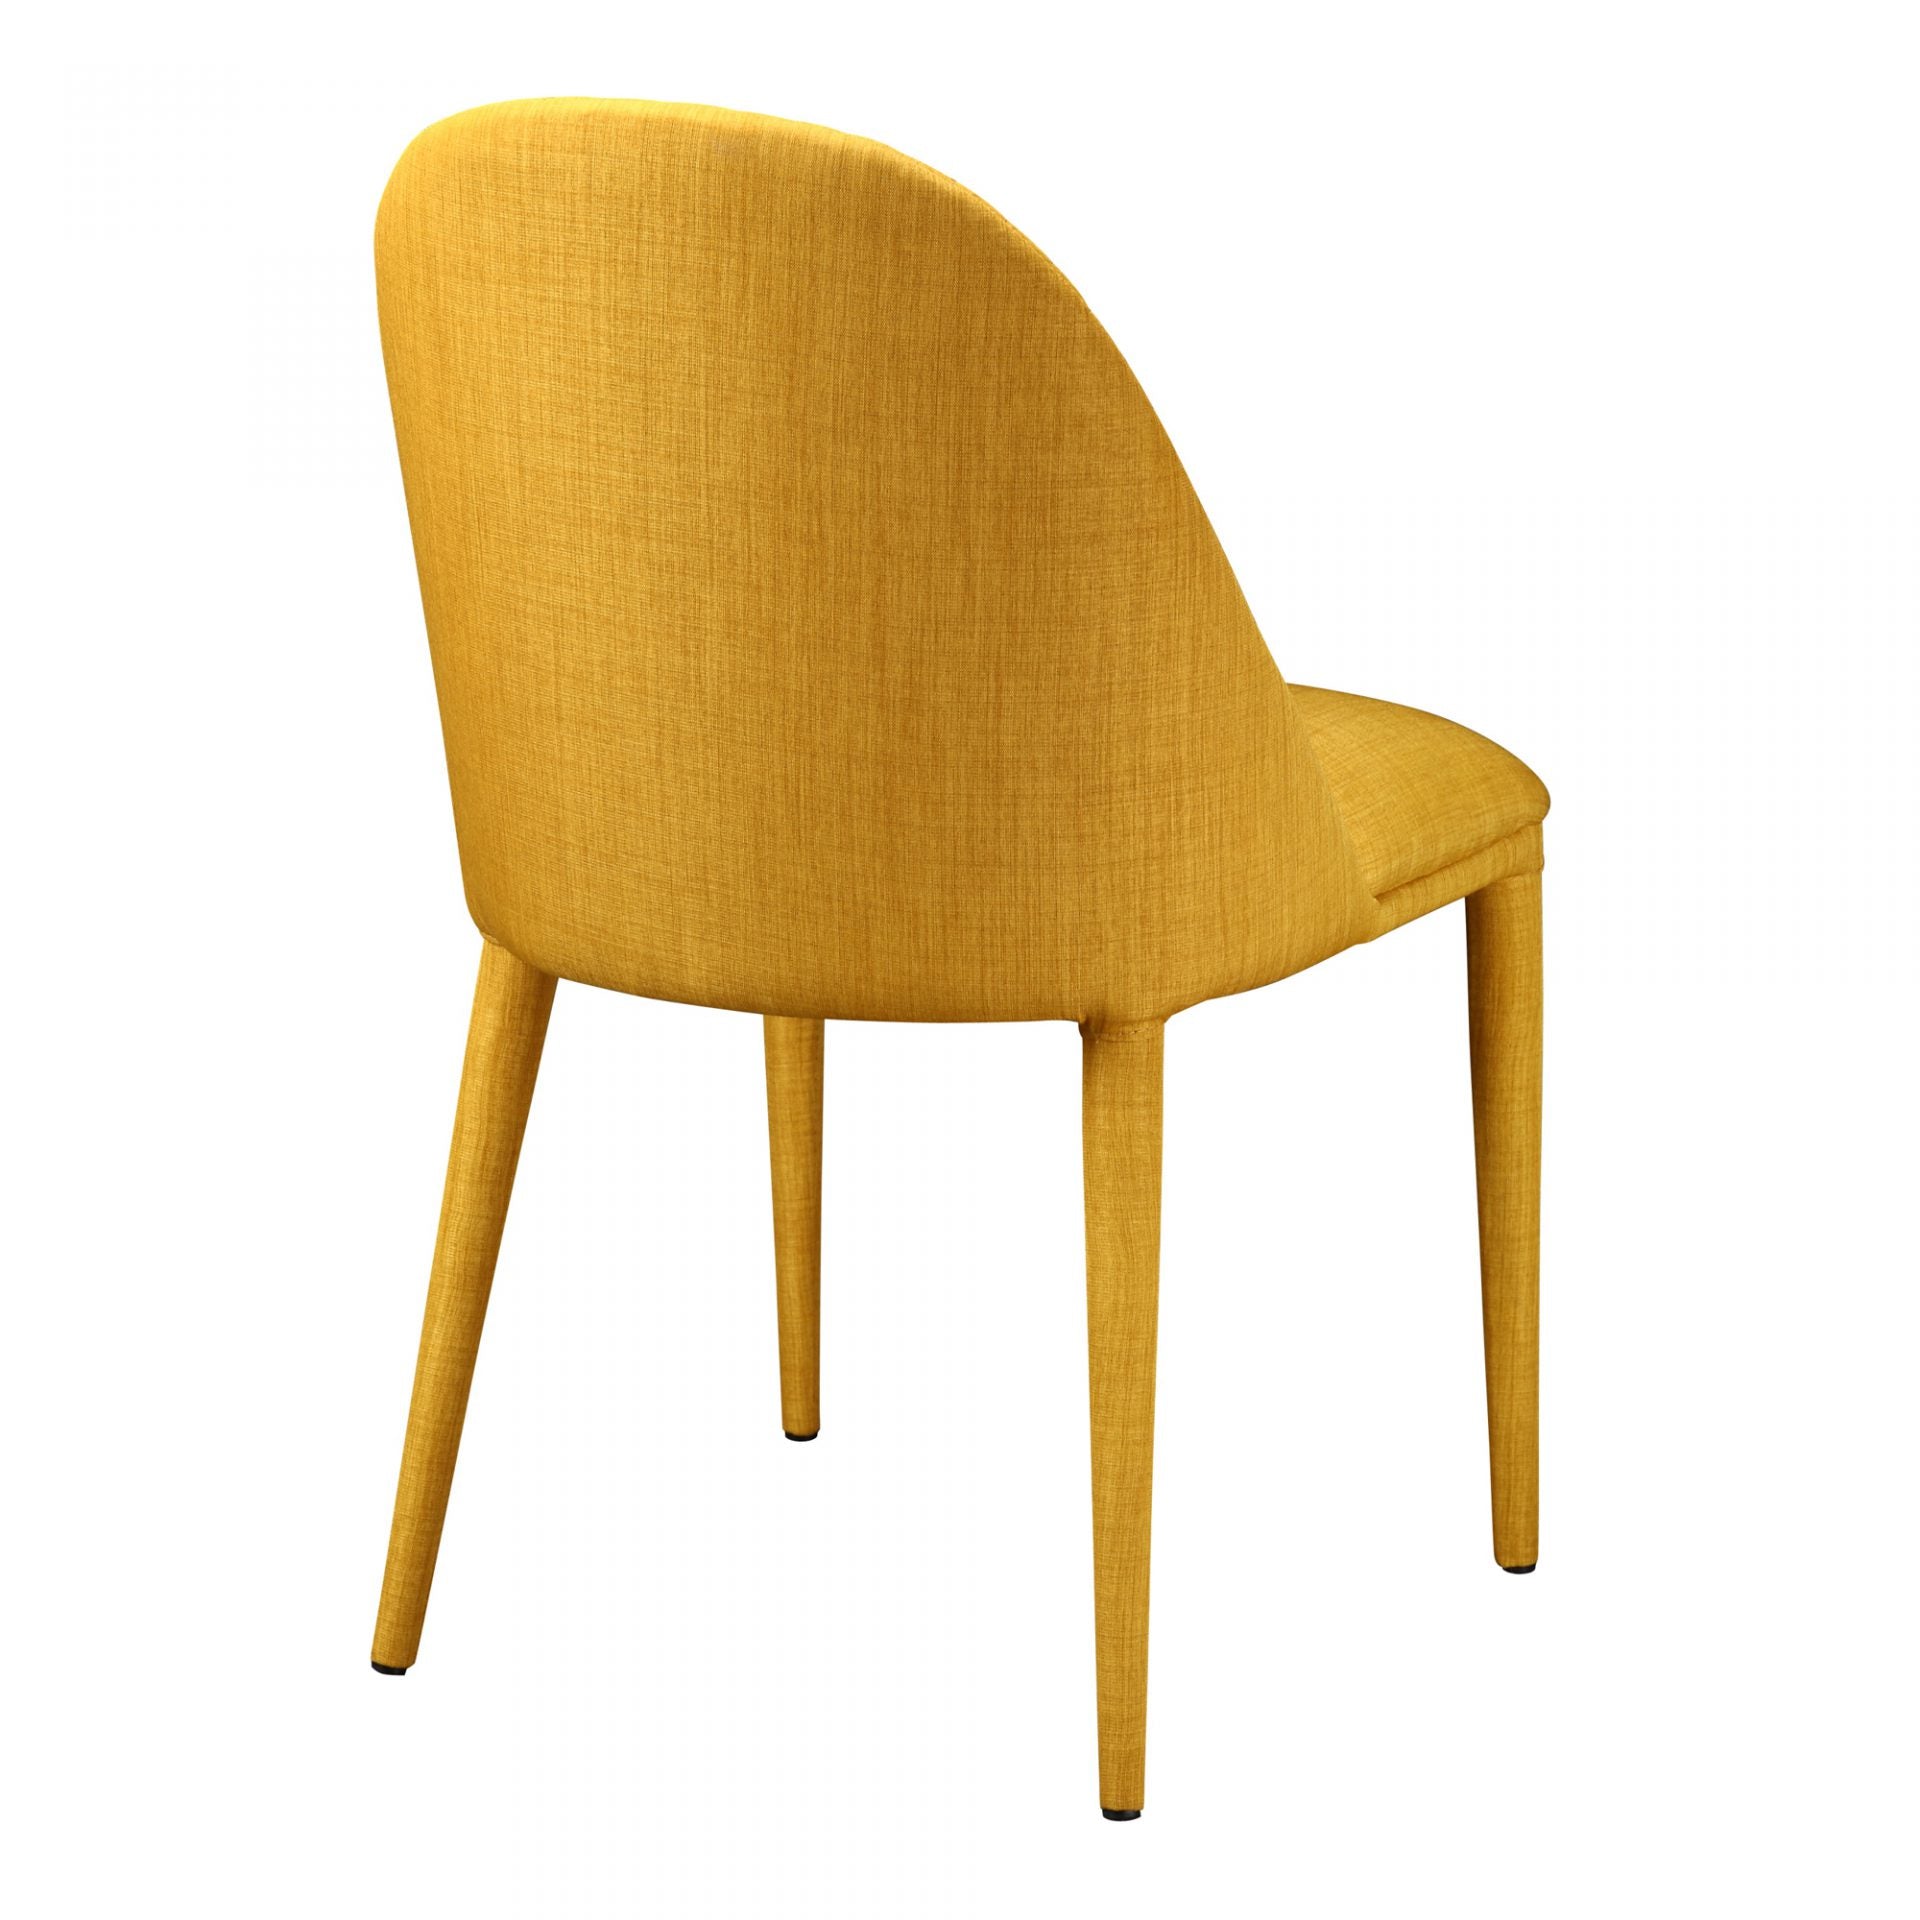 Libby Dining Chair